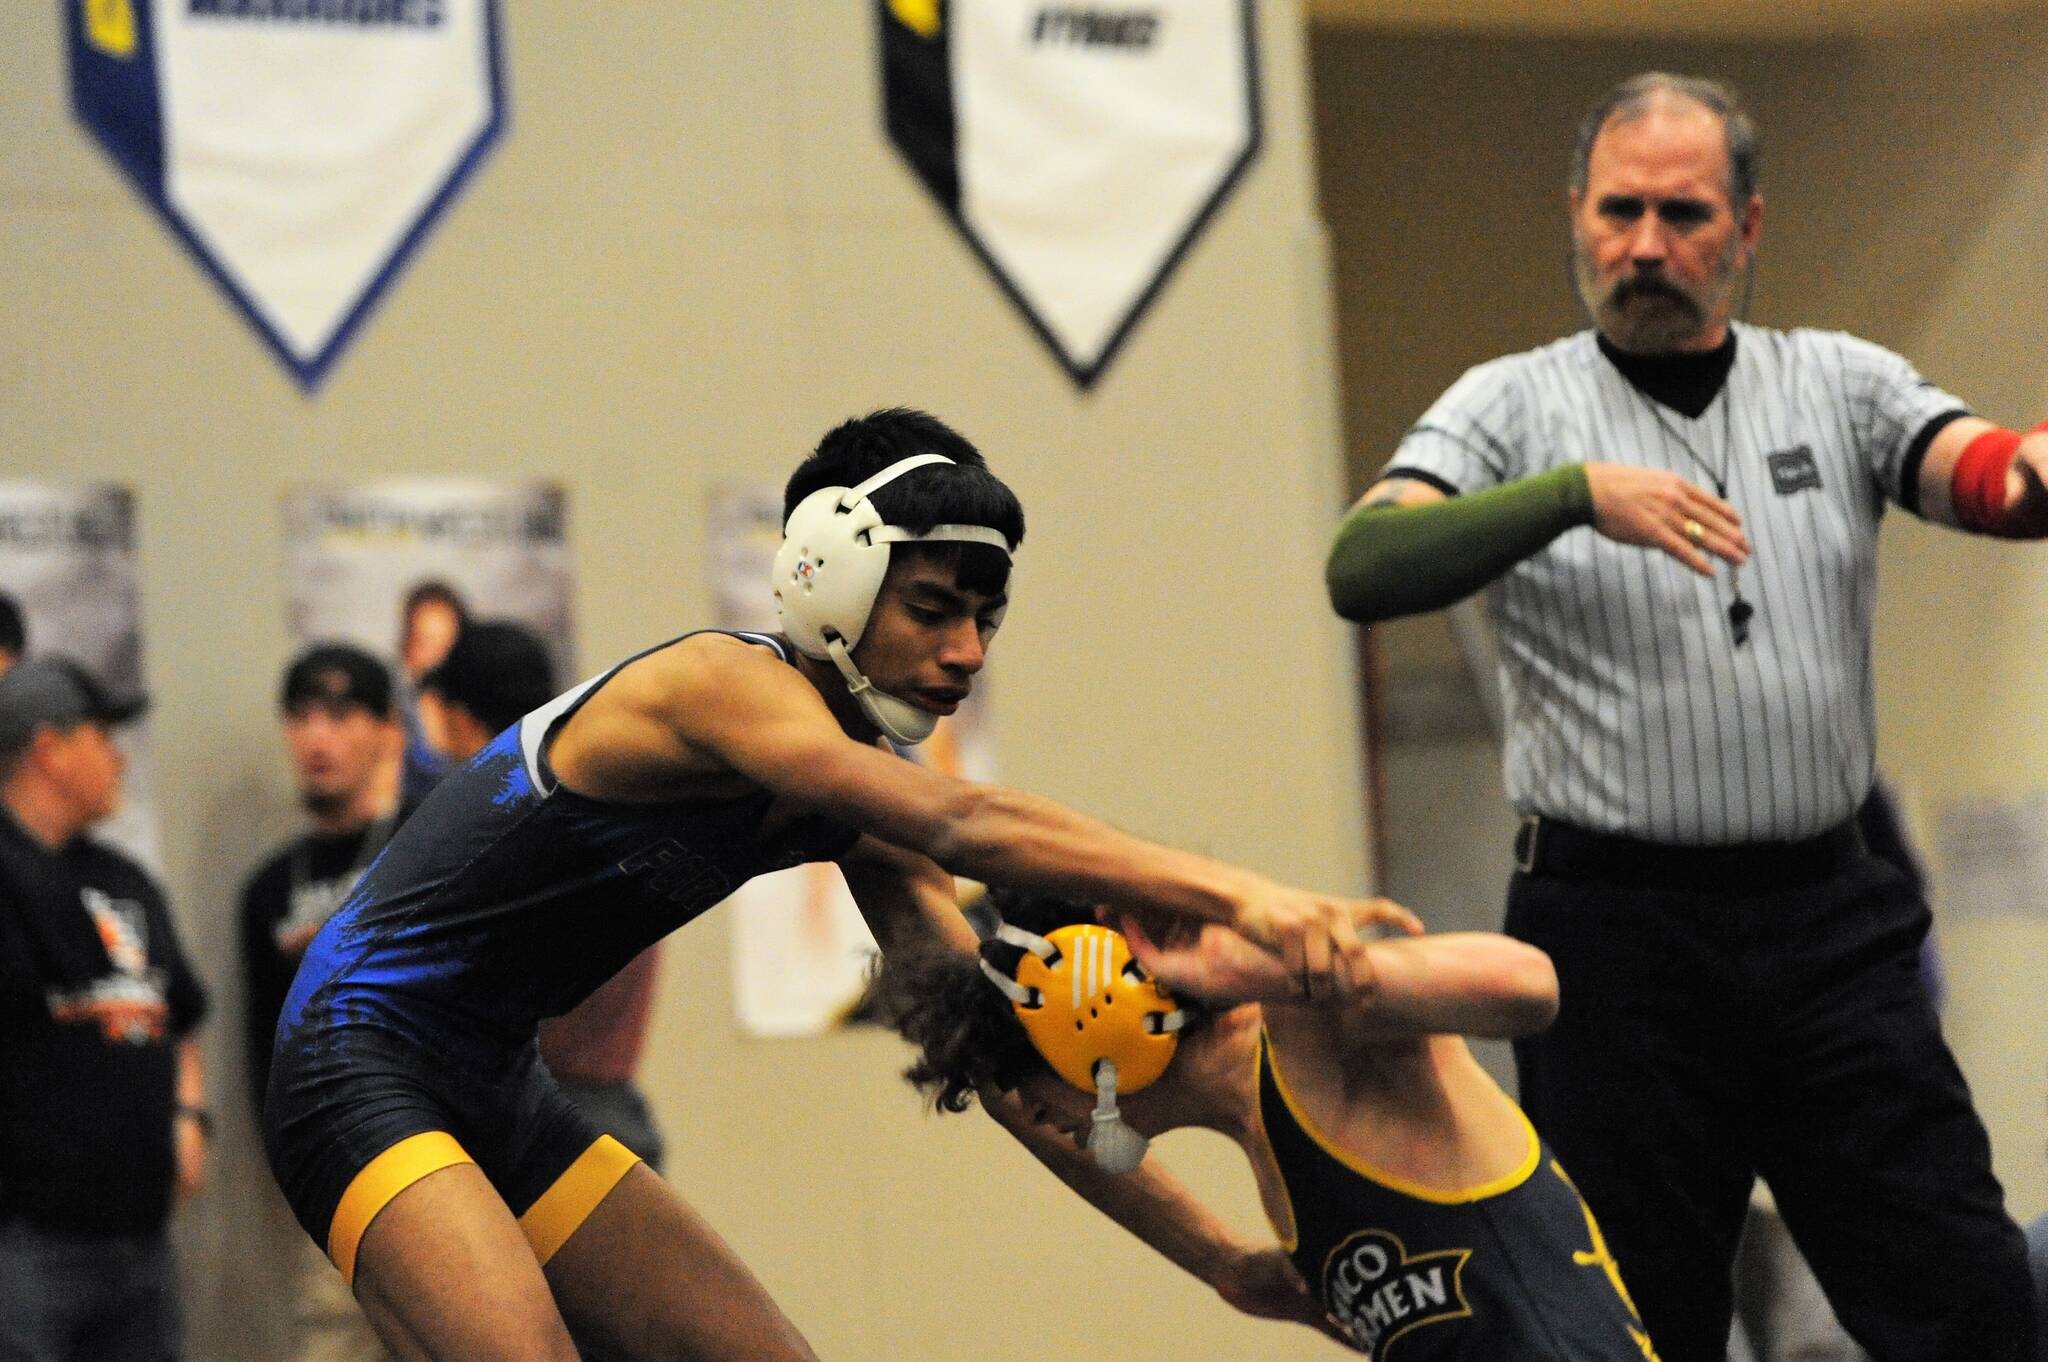 Spartan Abraham Monteleagre won over Jace Linithankan of Ilwaco in the 106 lb class.